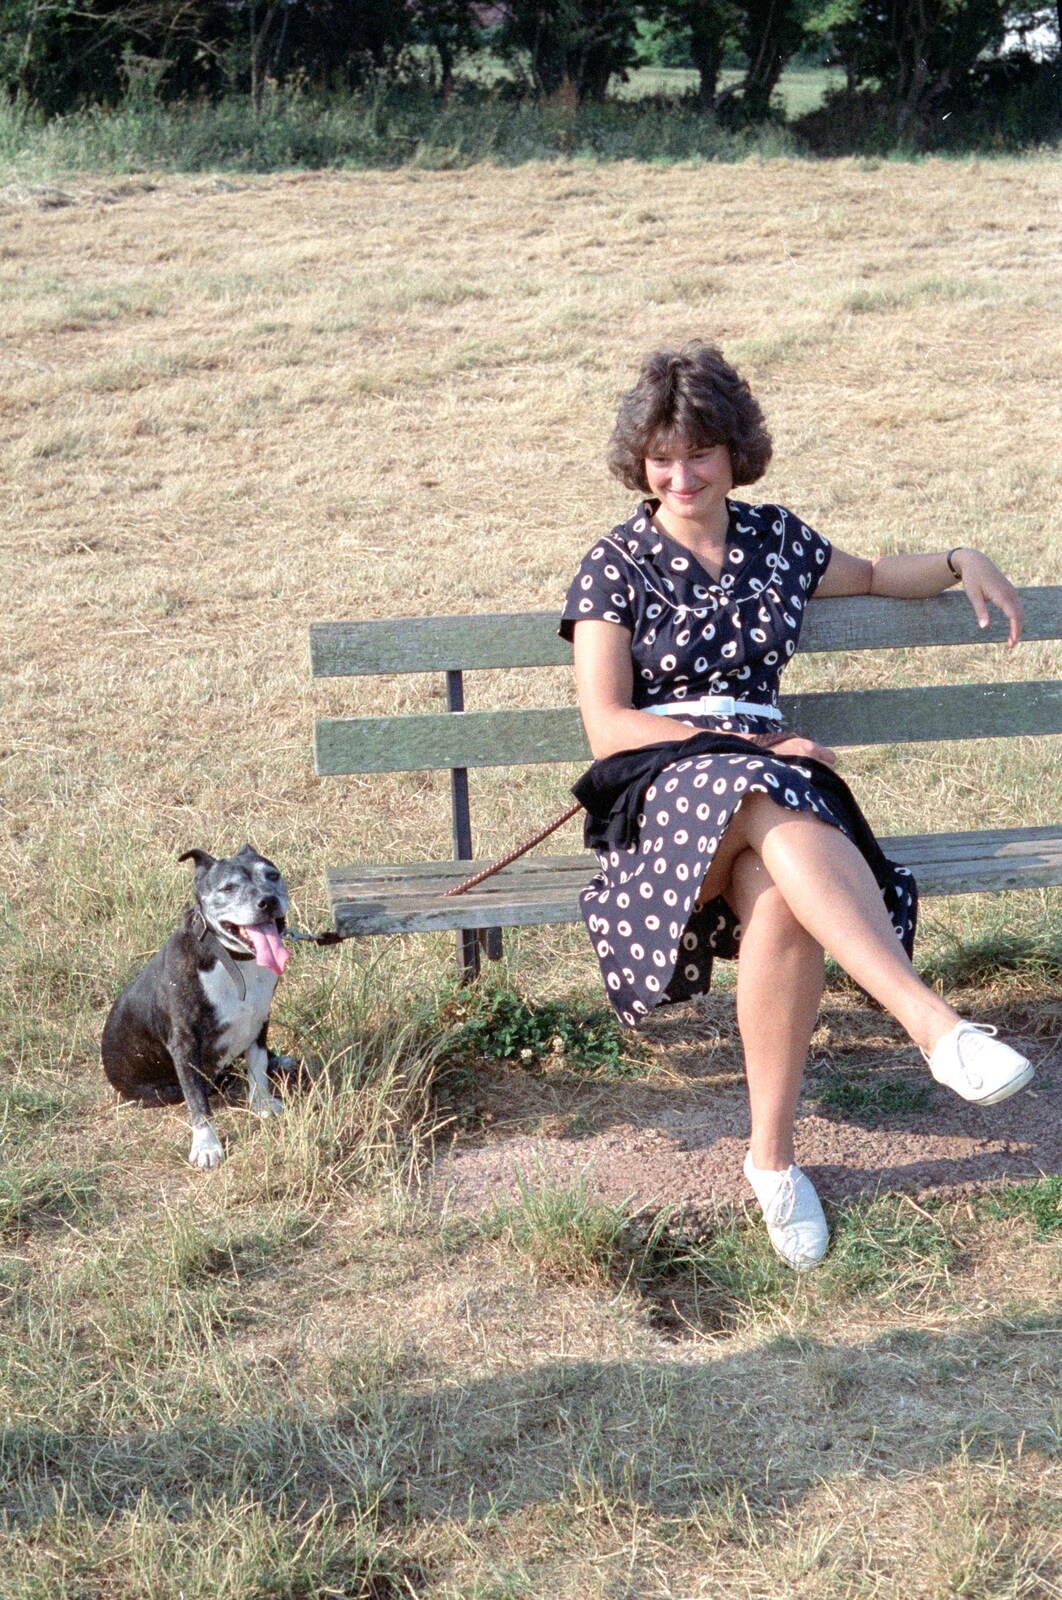 Angela with dog from Uni: A Trip to the Riviera and Oberon Gets New Shoes, Torquay and Harbertonford, Devon - 3rd July 1989